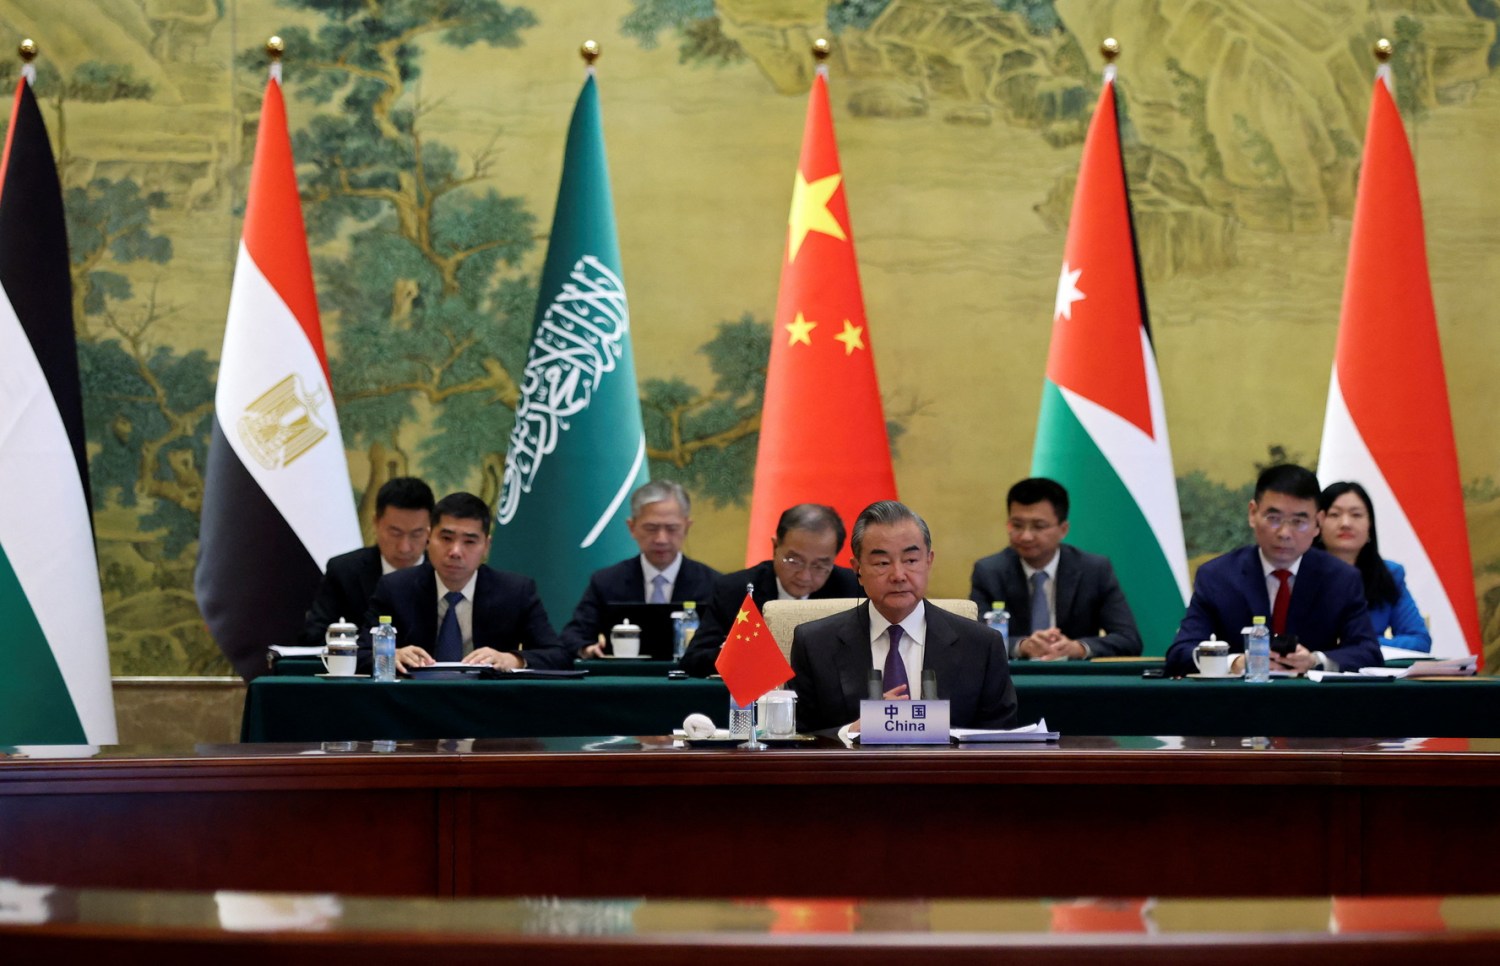 Chinese Foreign Minister Wang Yi attends a meeting with Saudi, Jordanian, Egyptian, Indonesian, Palestinian, and Organization of Islamic Cooperation delegations at the Diaoyutai State Guesthouse in Beijing, China, November 20, 2023. REUTERS/Florence Lo/Pool